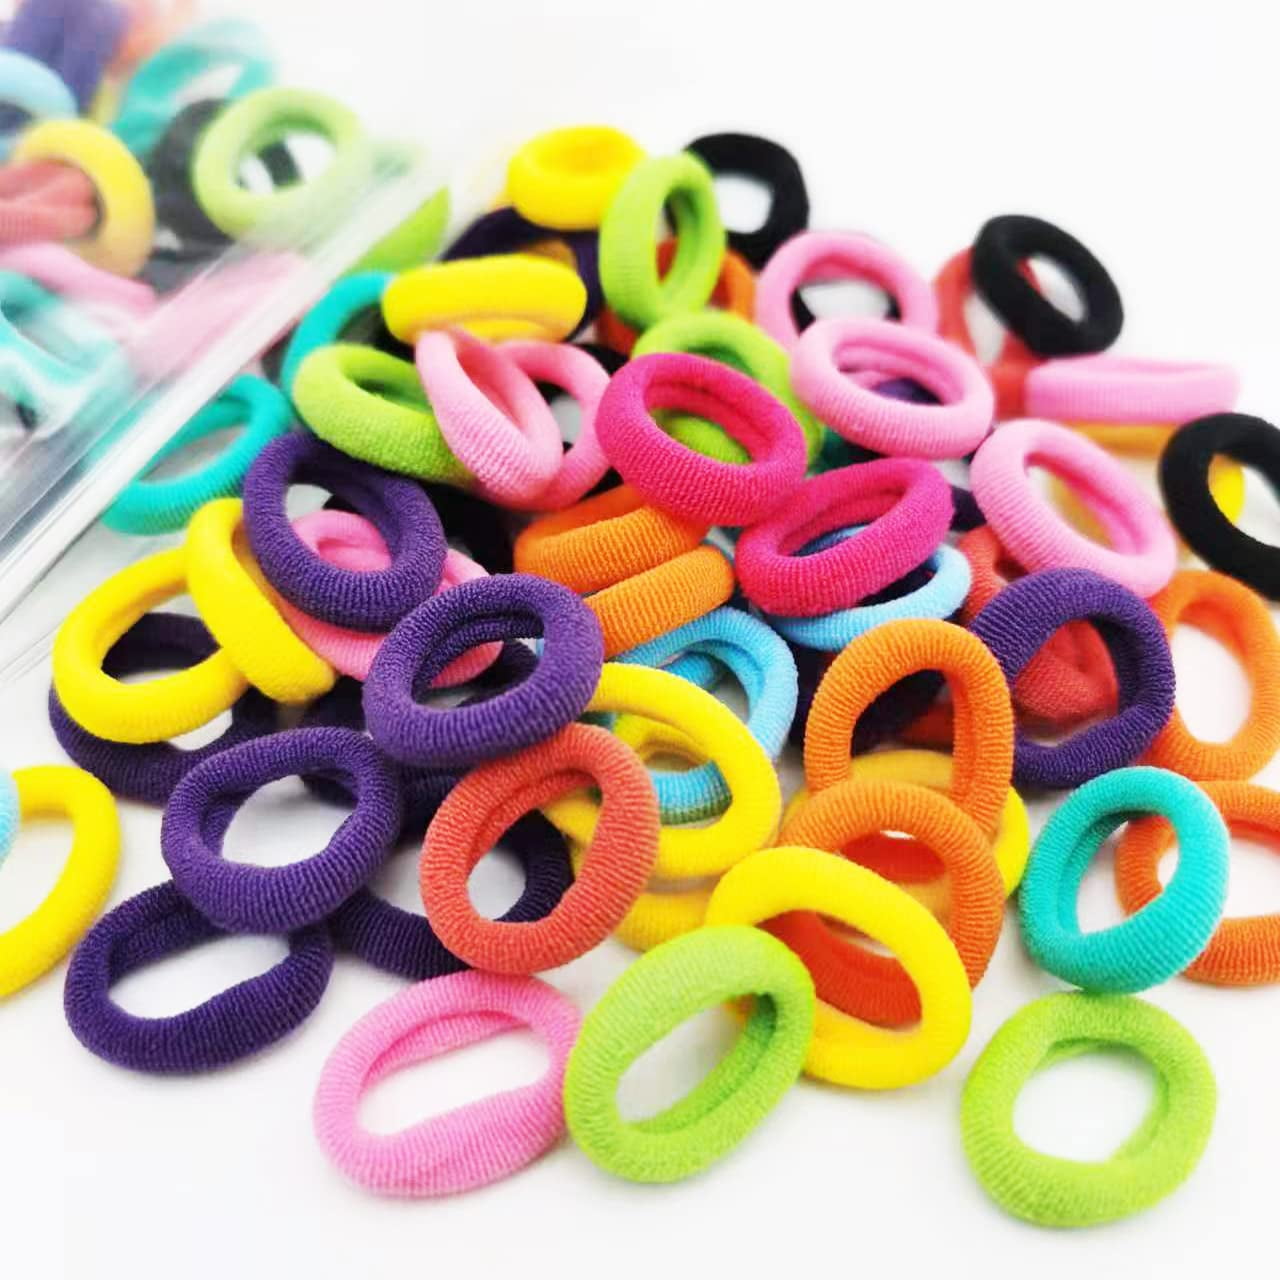 50/100 Girls Baby Sngless Cotton Hair Ties Hair bands For Ponytail Holder 